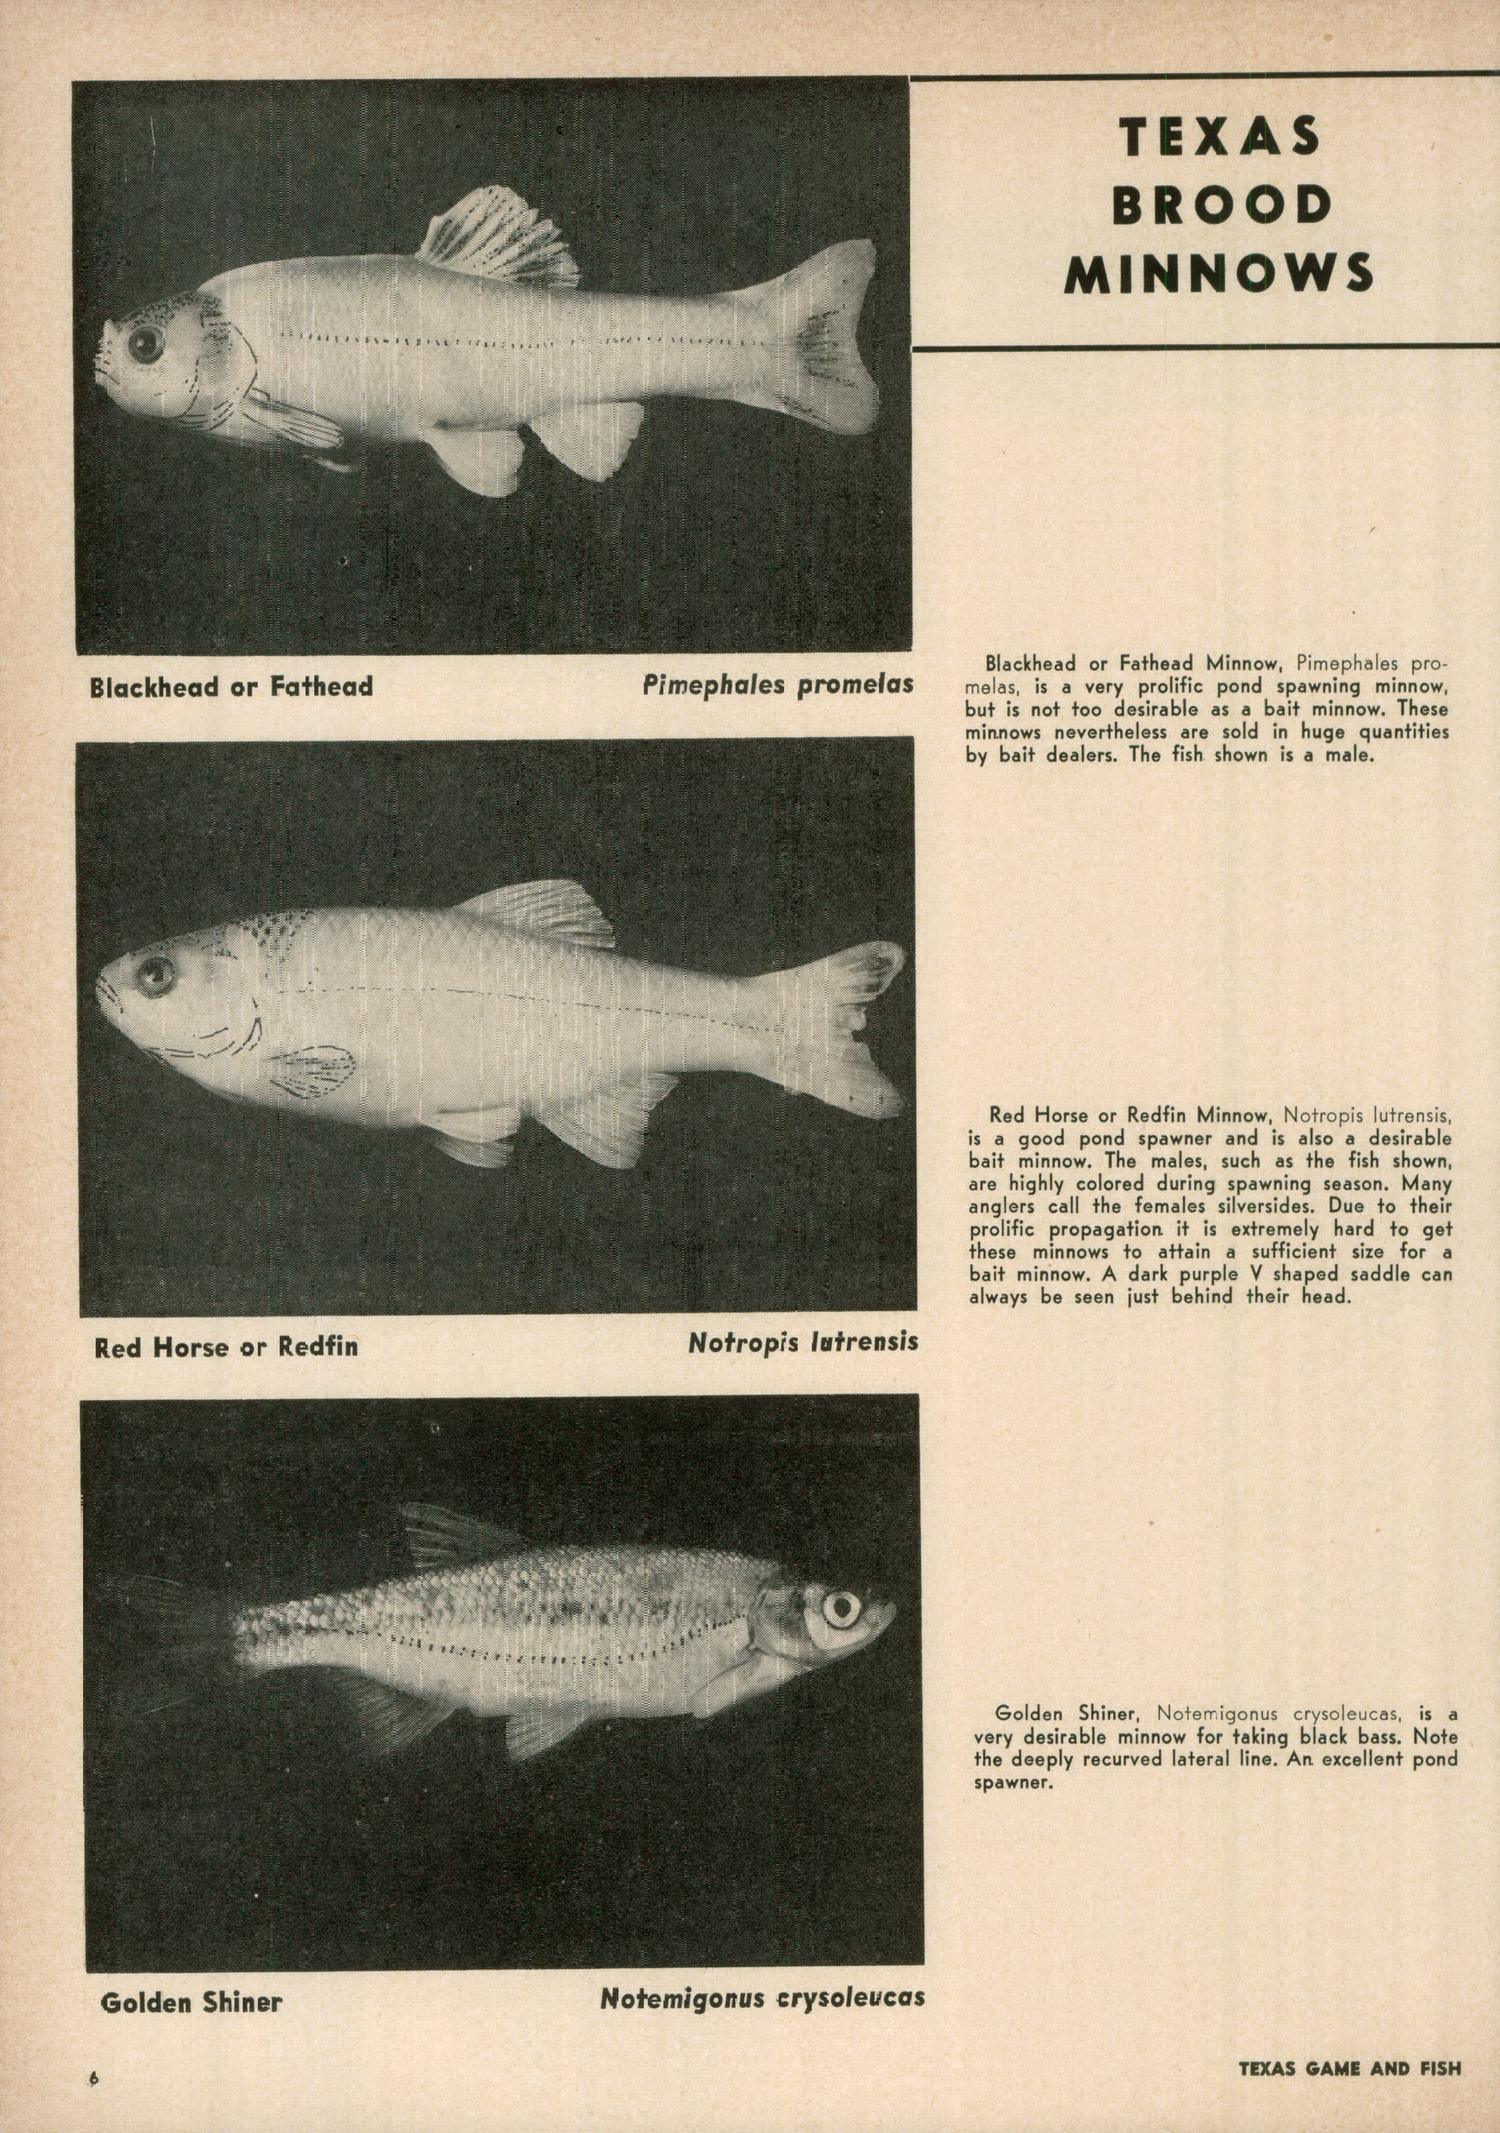 Texas Game and Fish, Volume 13, Number 4, April 1955
                                                
                                                    6
                                                